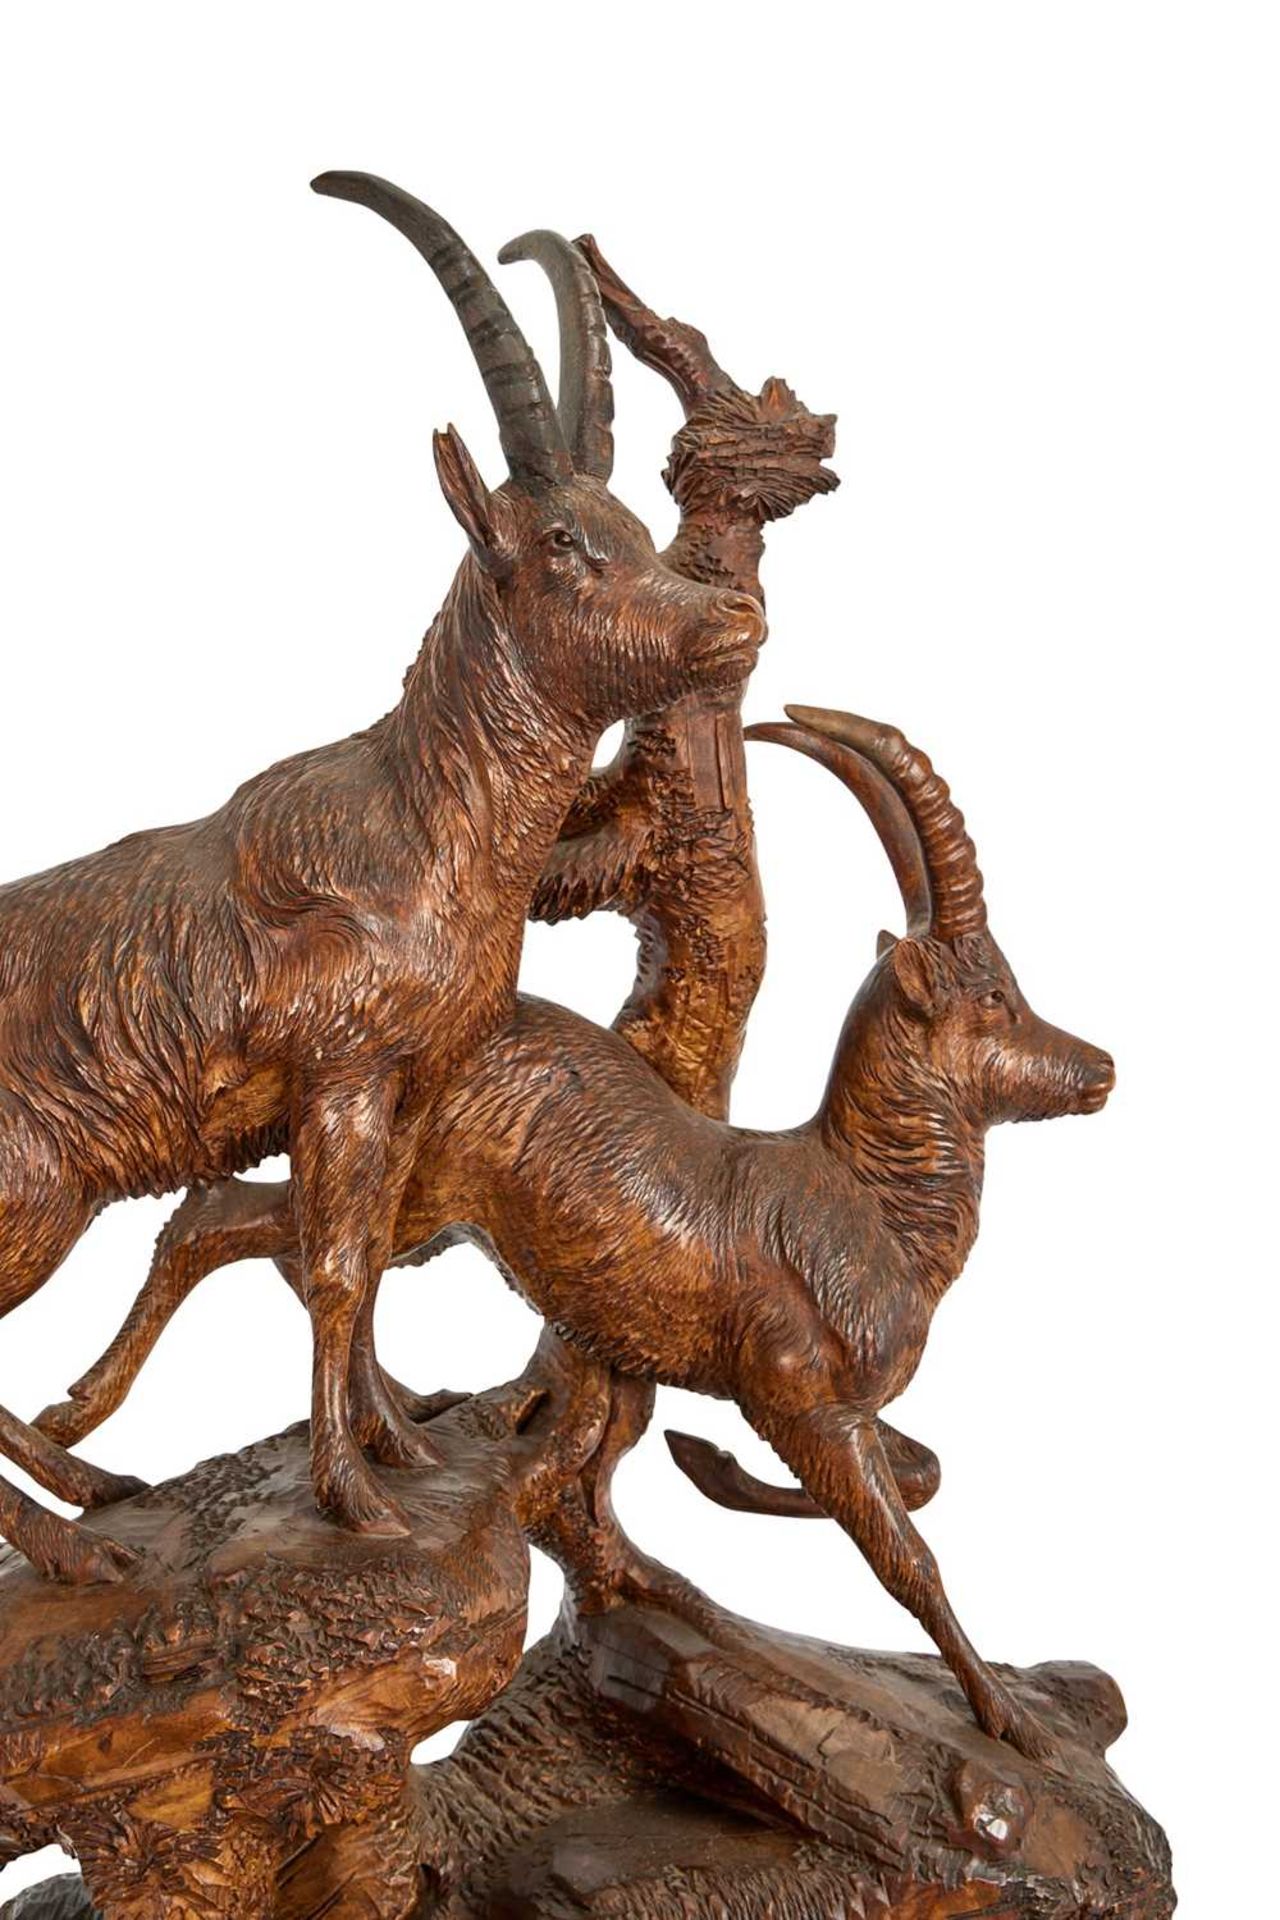 A LARGE LATE 19TH CENTURY BLACK FOREST CARVED LINDENWOOD GROUP OF IBEXES - Image 3 of 5